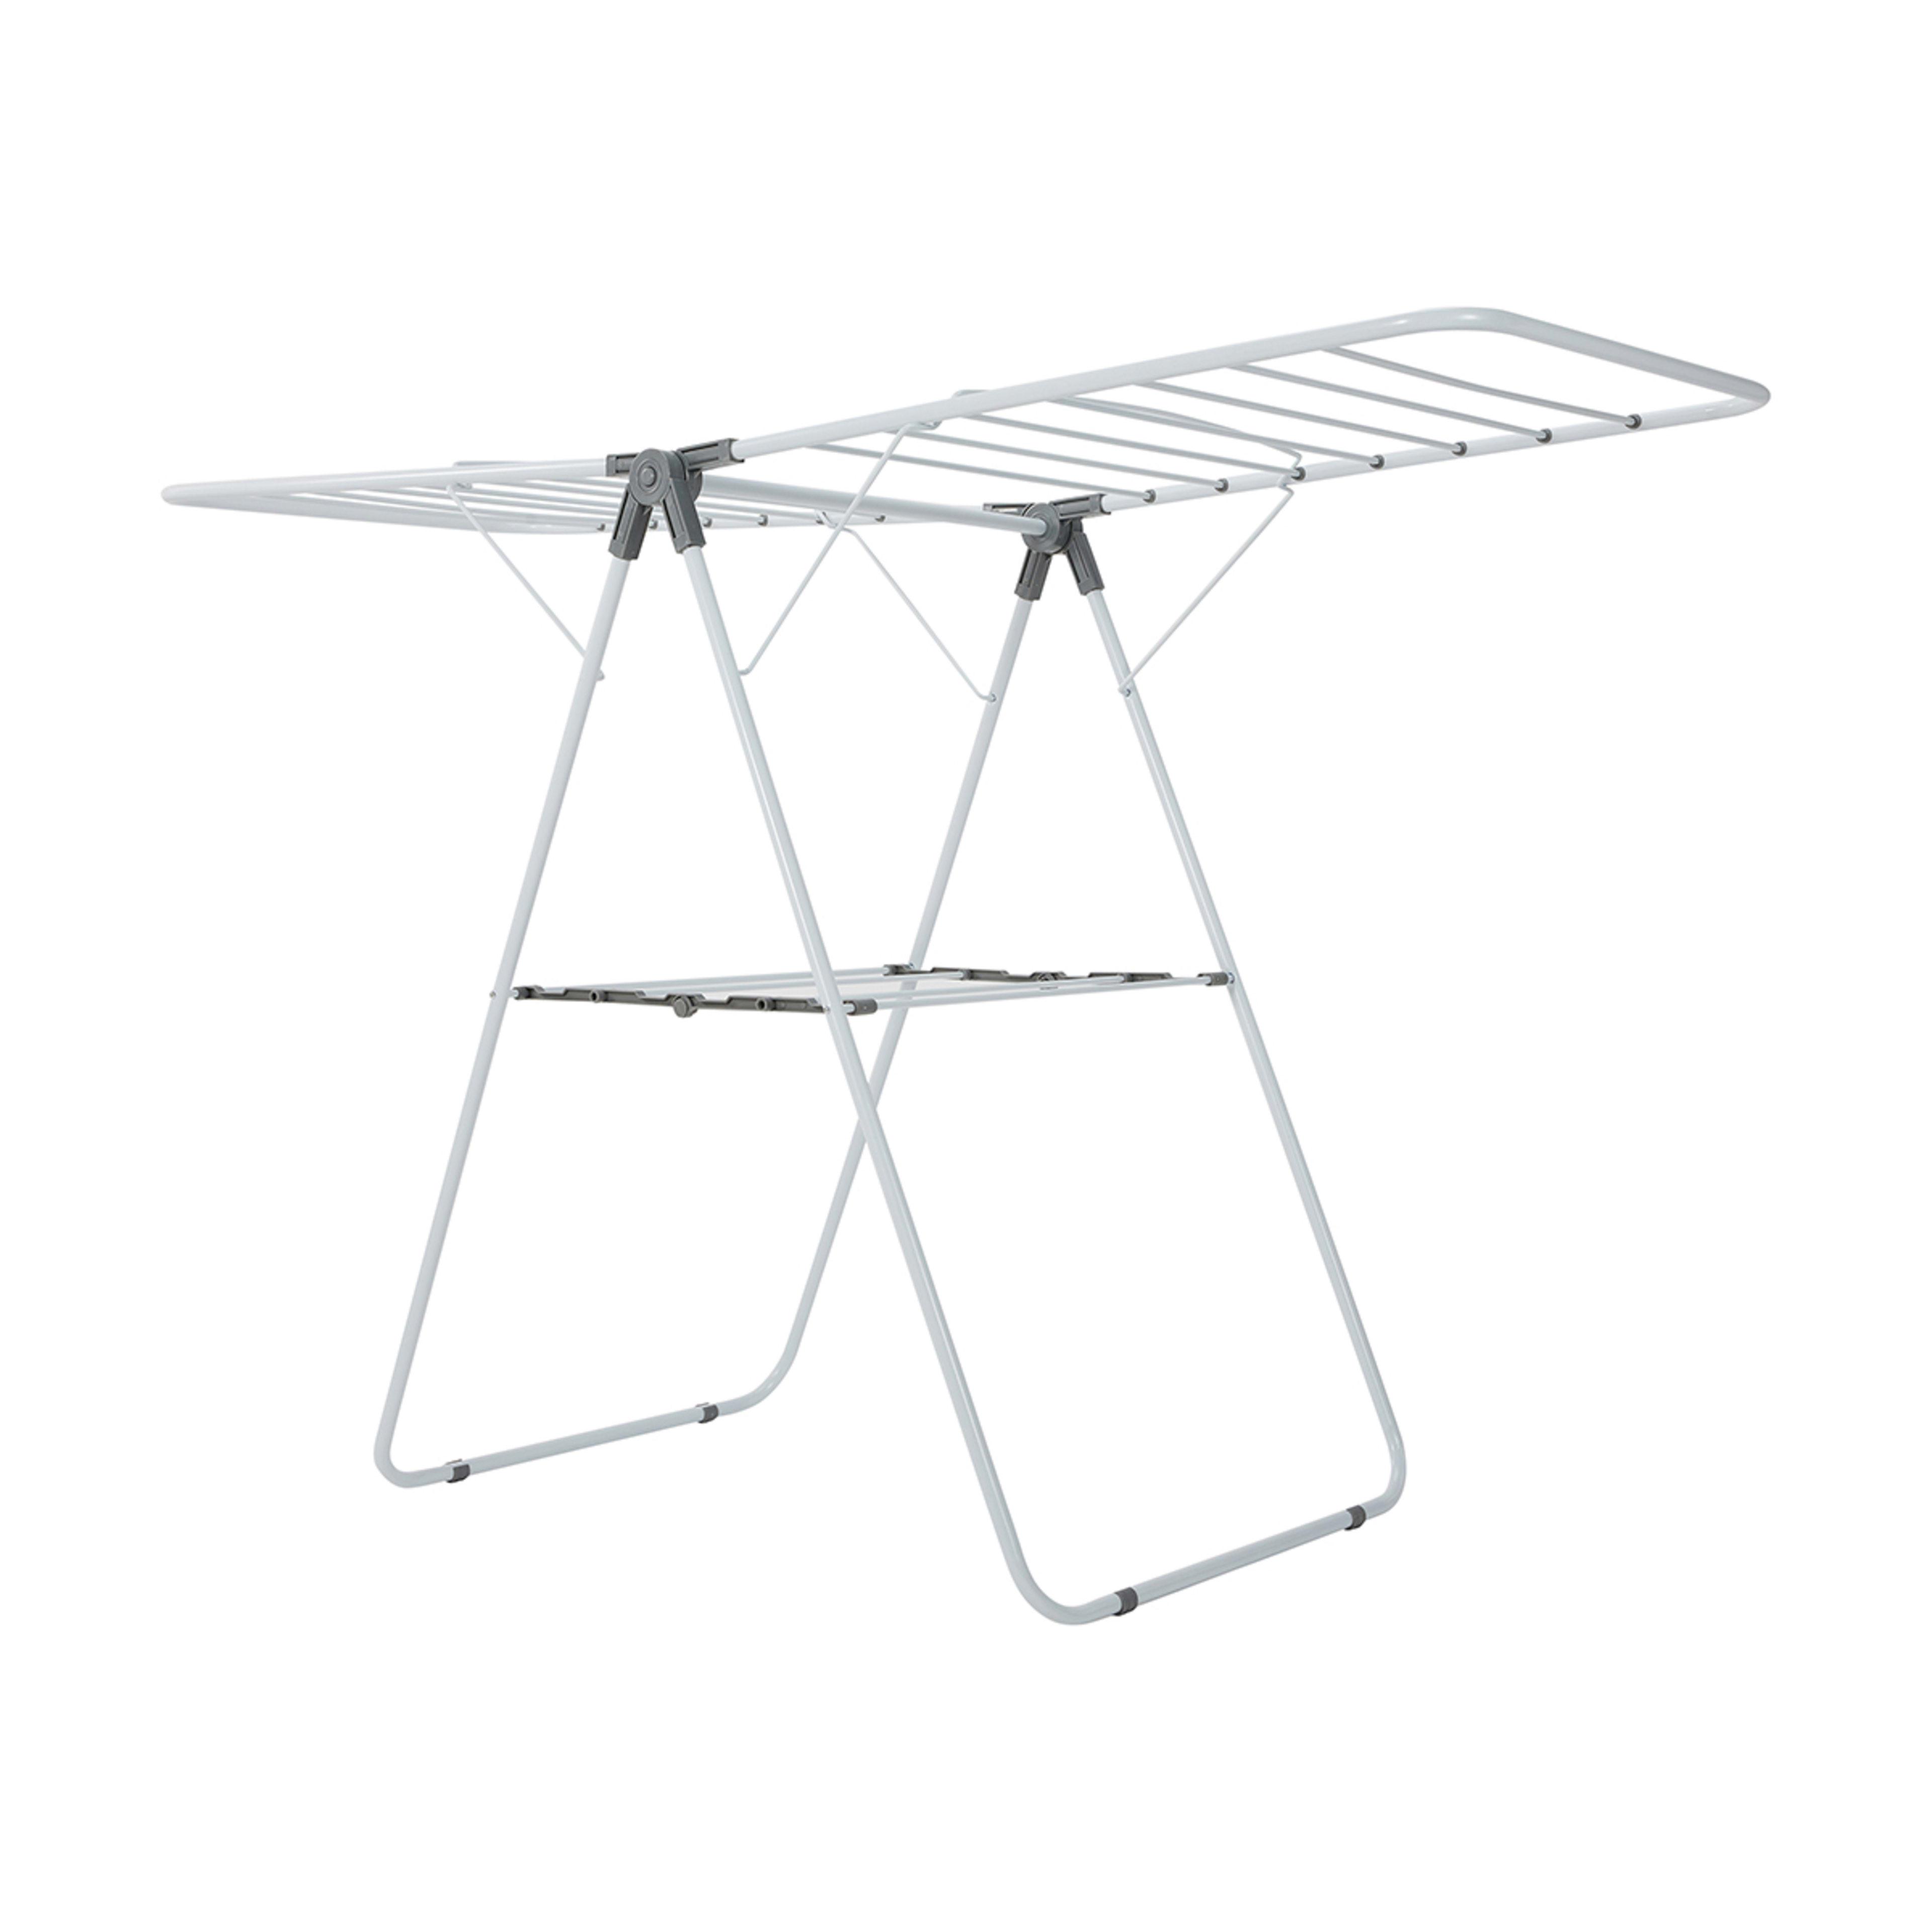 Cross Winged Clothes Airer - Kmart